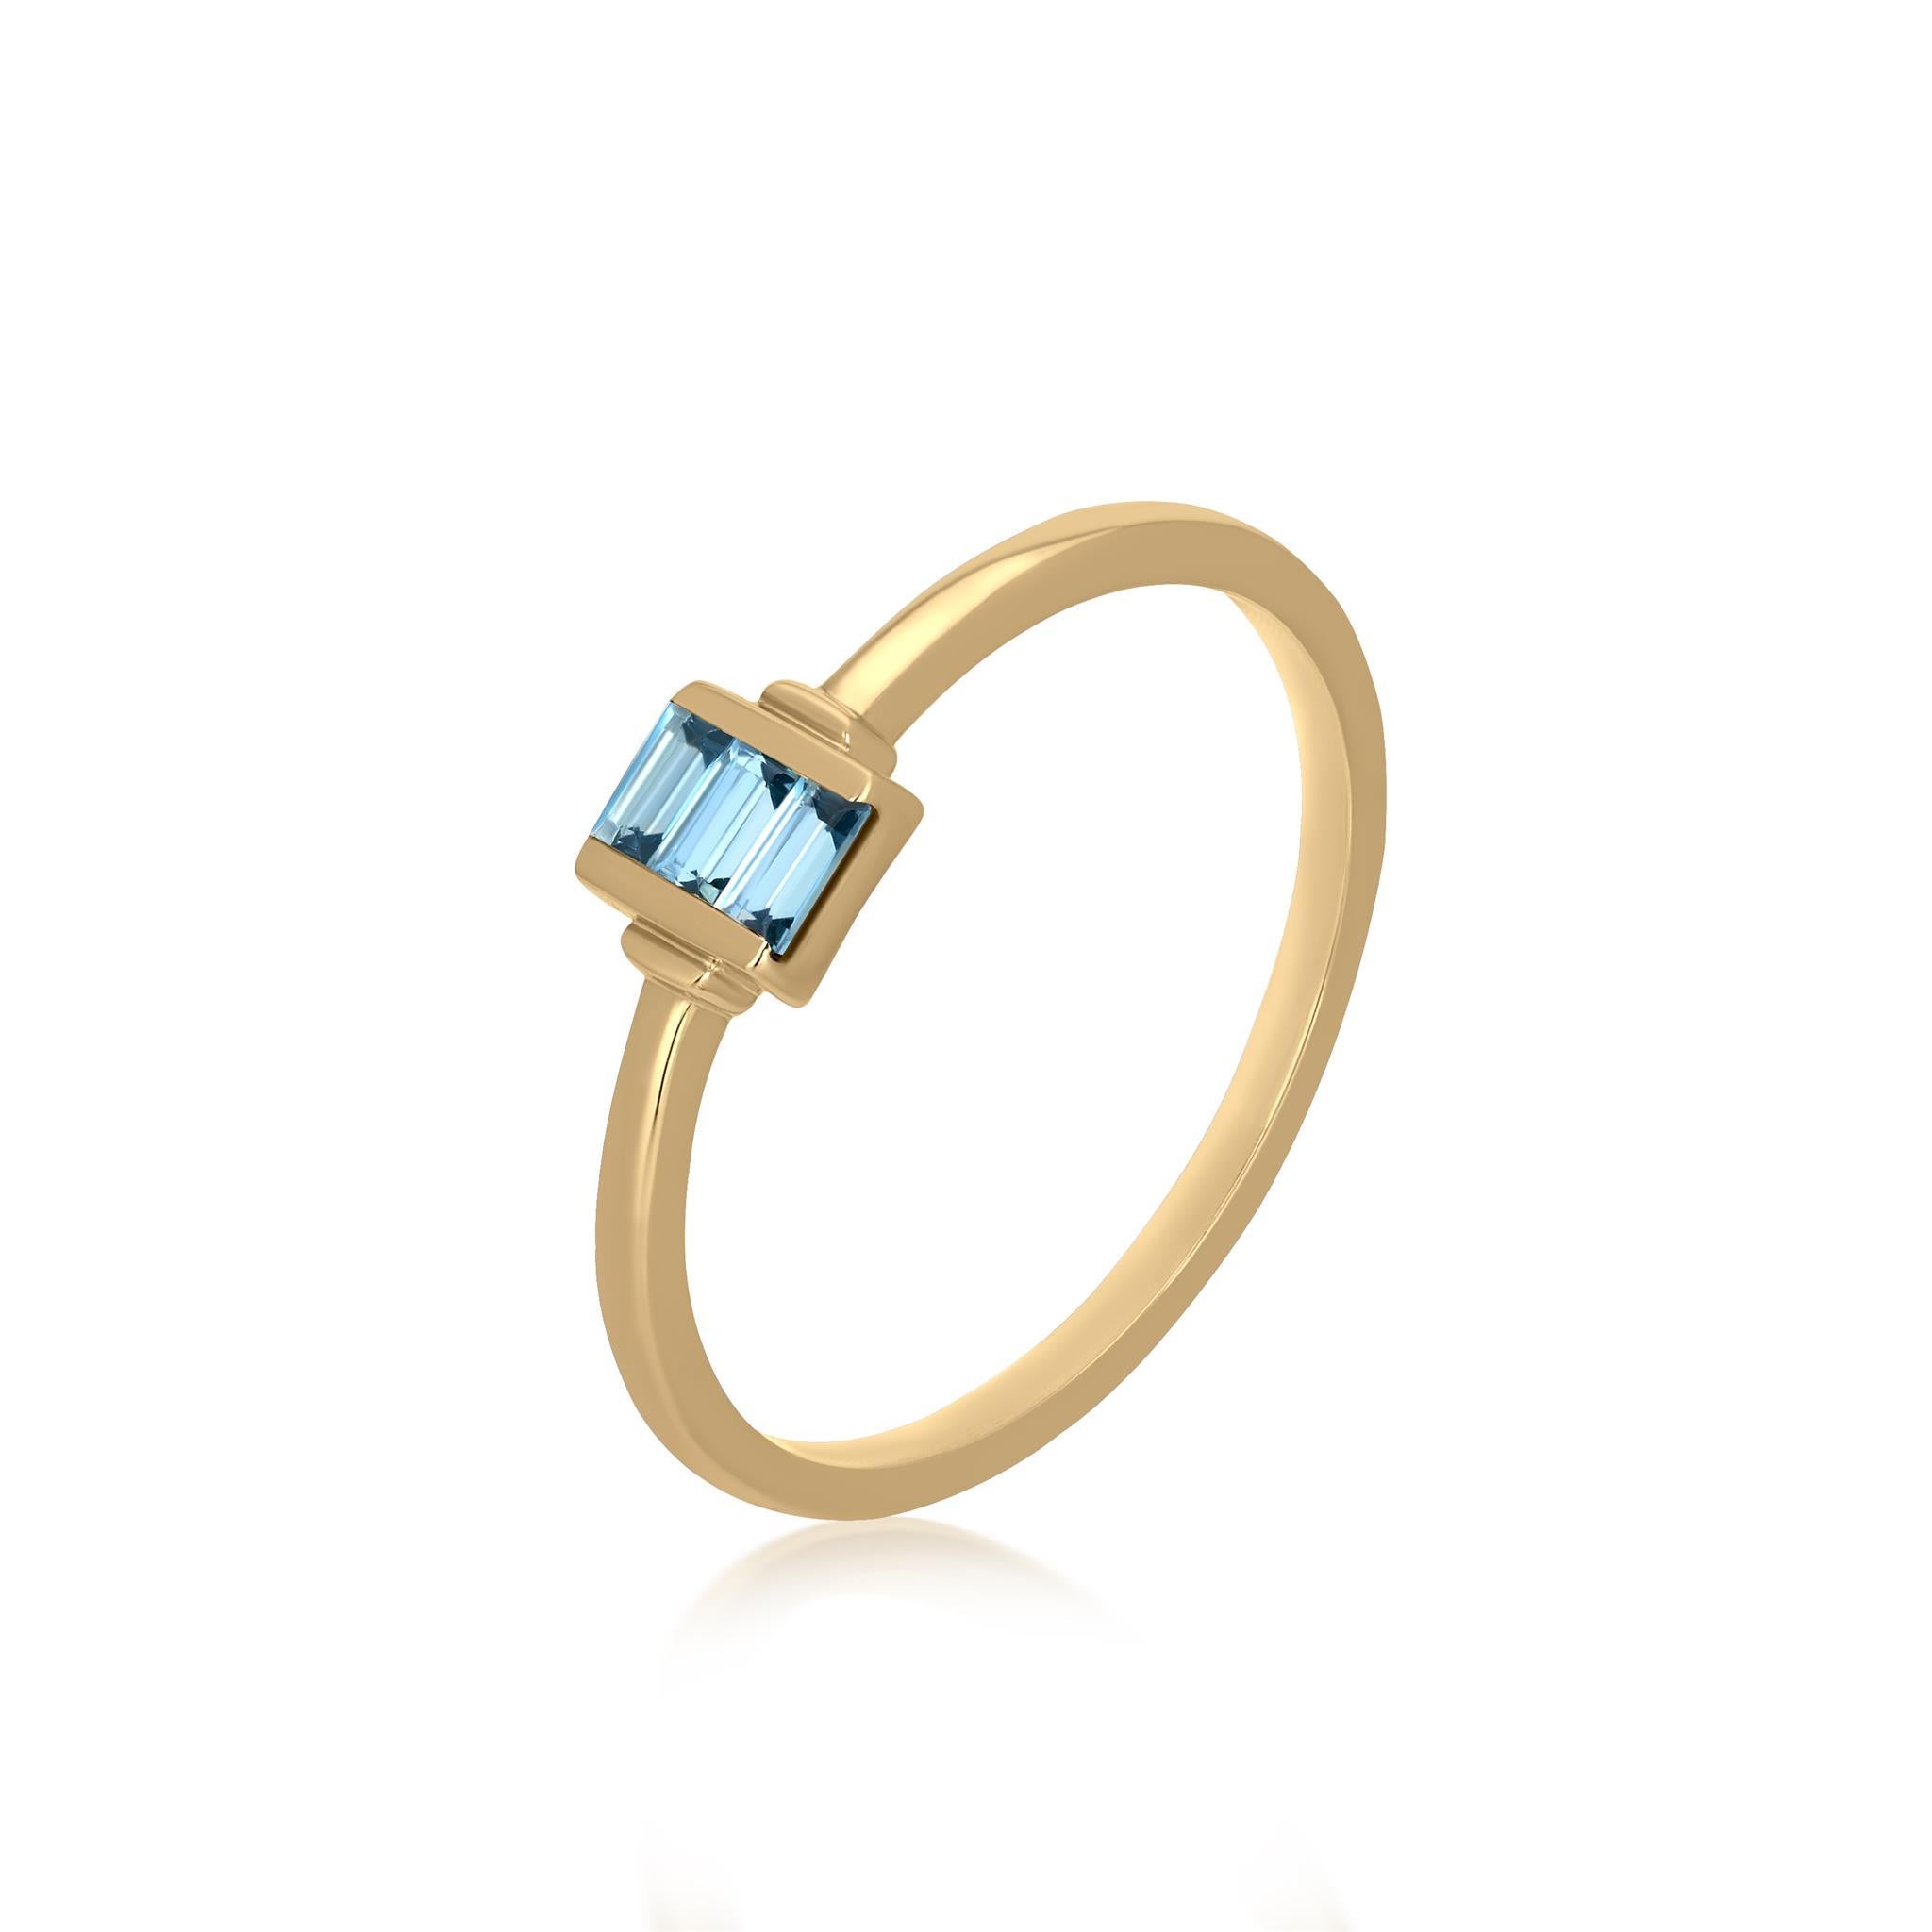 Baguette-cut Blue Topaz are set in 14K yellow gold in this Gemistry ring, which is also attractive, sturdy, and straightforward. There are 0.22 carats in the Blue Topaz. For young adults who prefer to keep their artistic endeavors minimal, this is